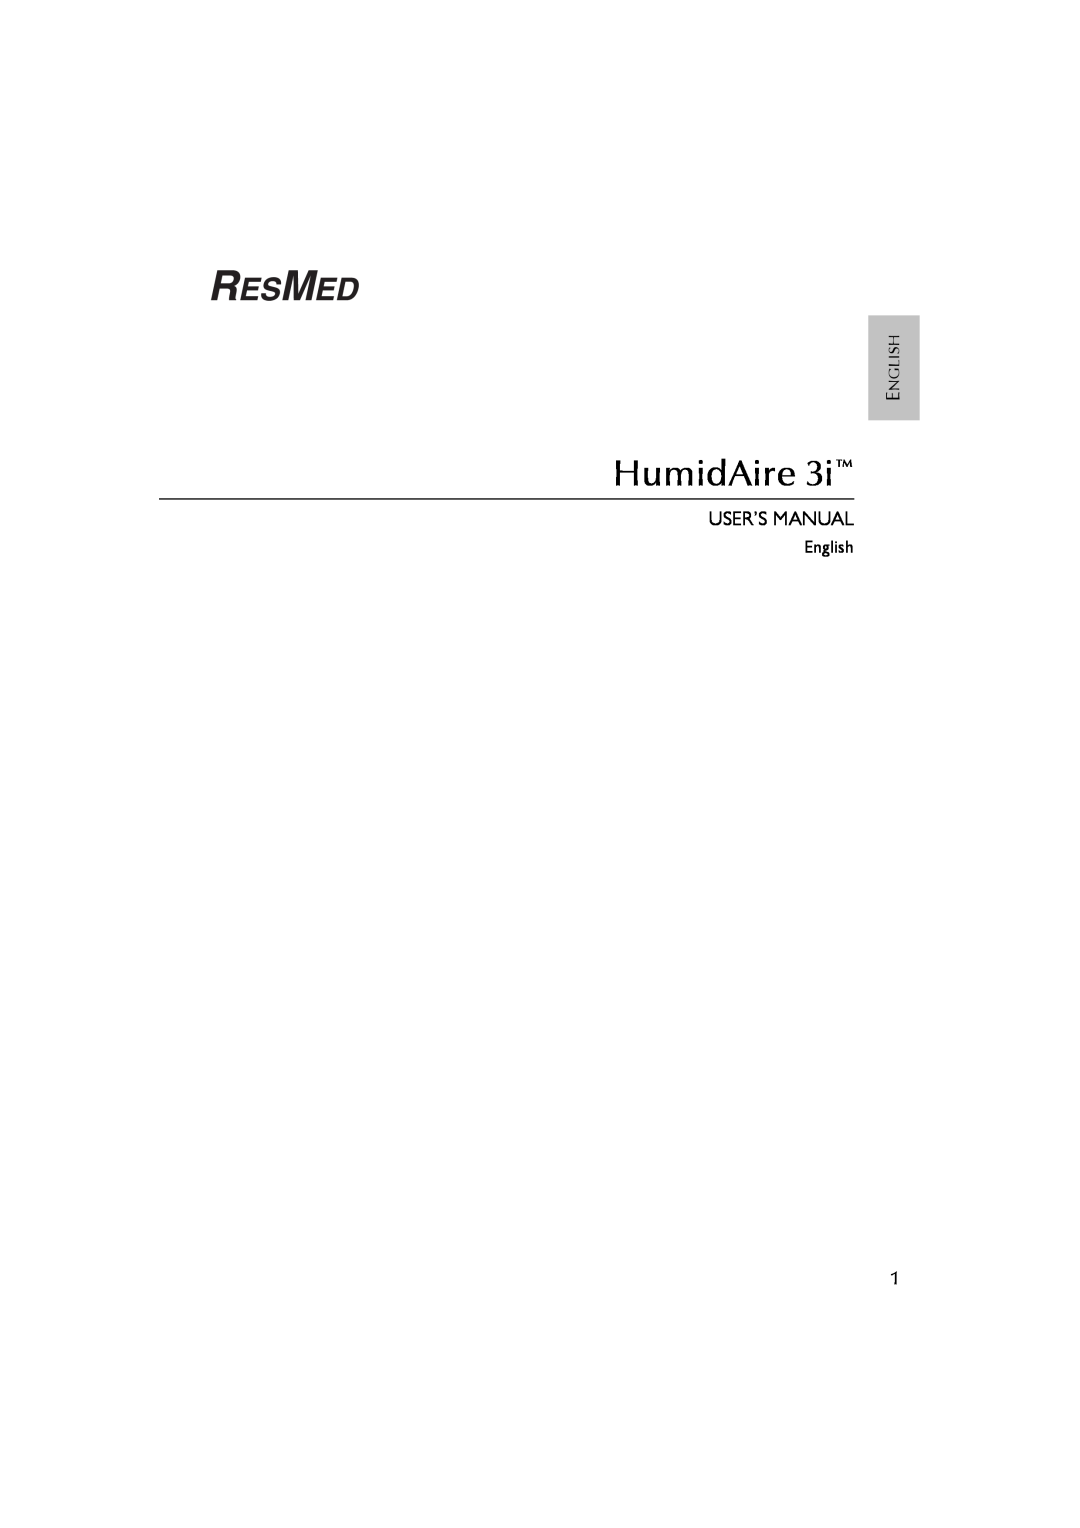 ResMed Humidifier user manual HumidAire, English 